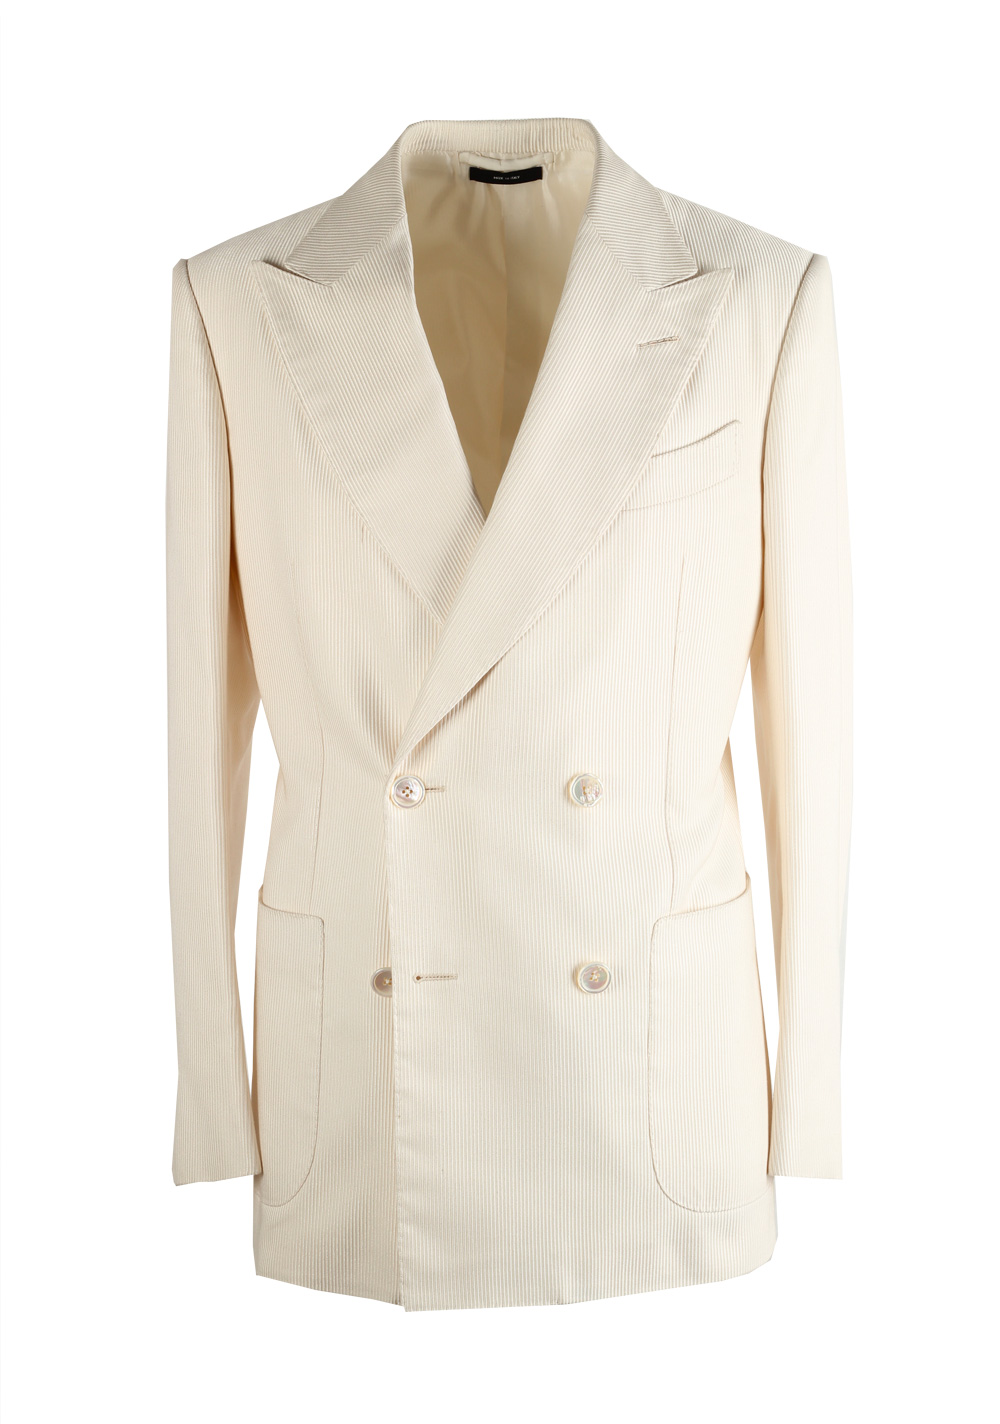 TOM FORD Shelton Double Breasted Off White Sport Coat Size 46 / 36R U.S ...